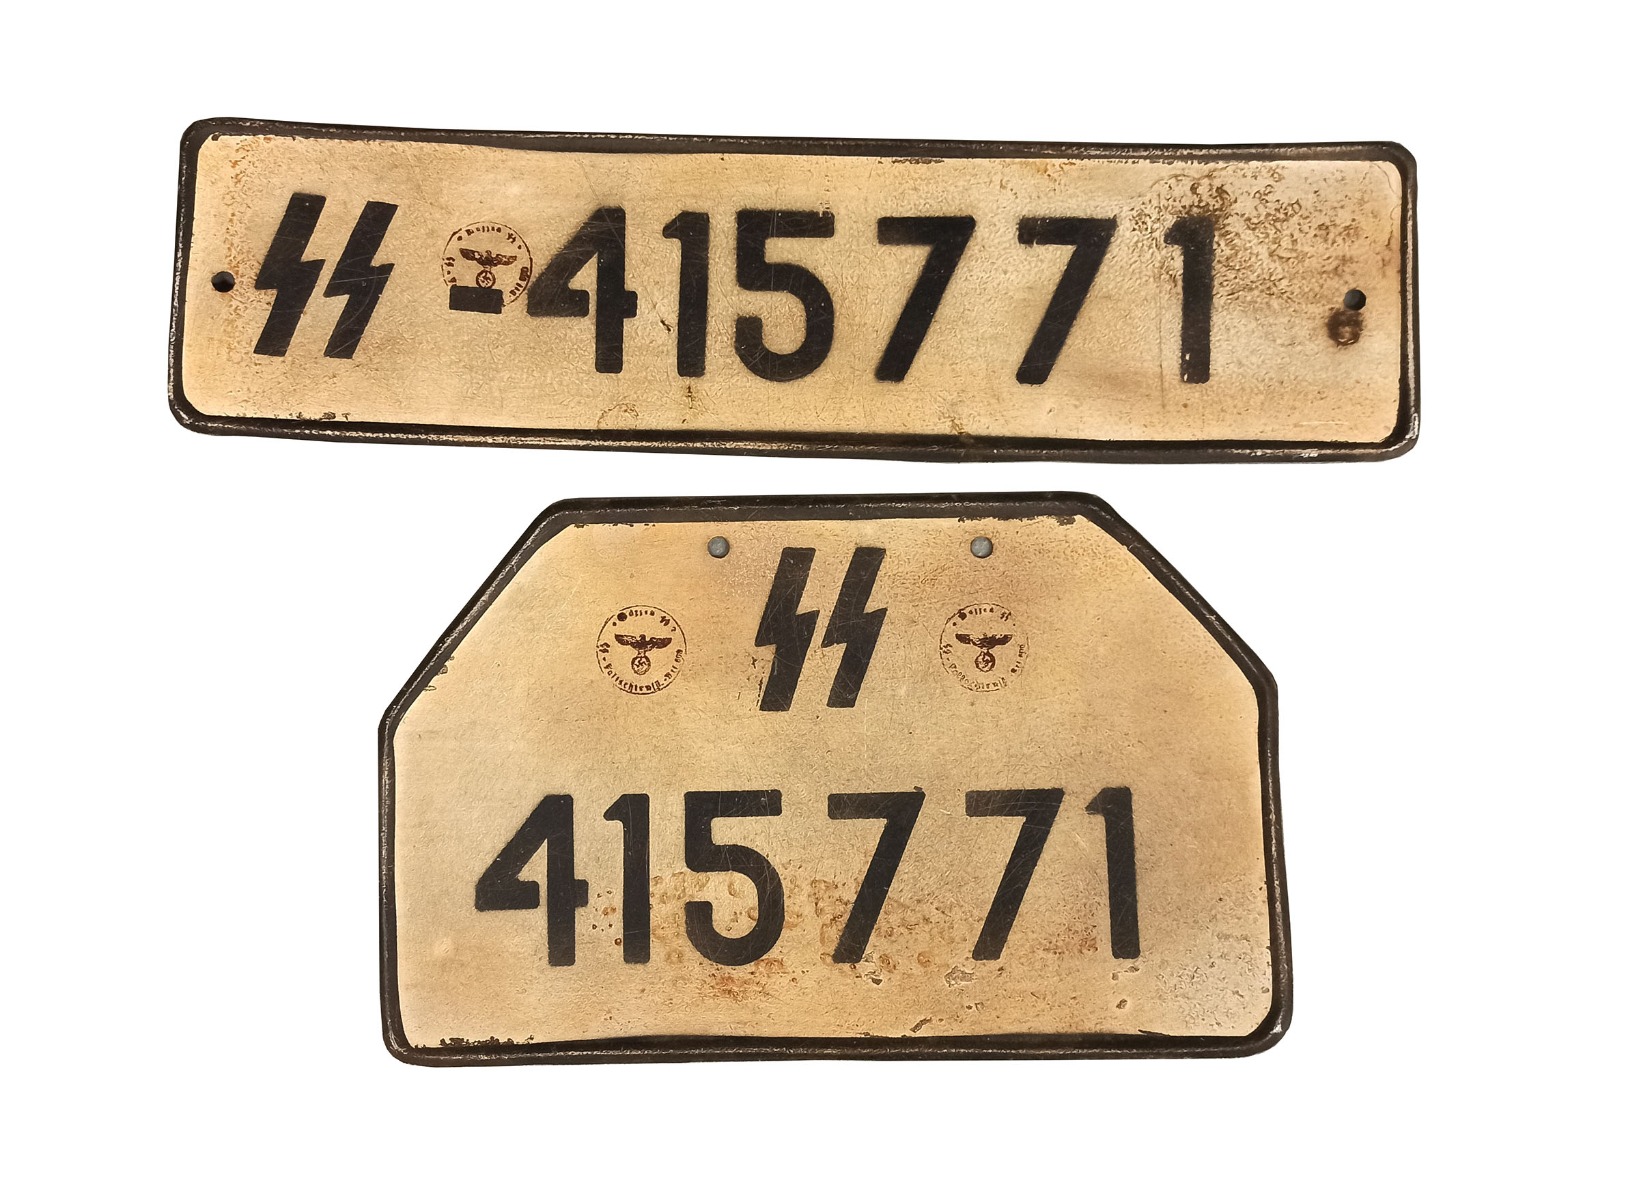 GERMAN WW2 SS TRUCK OR HALF TRACK LICENCE PLATE SET